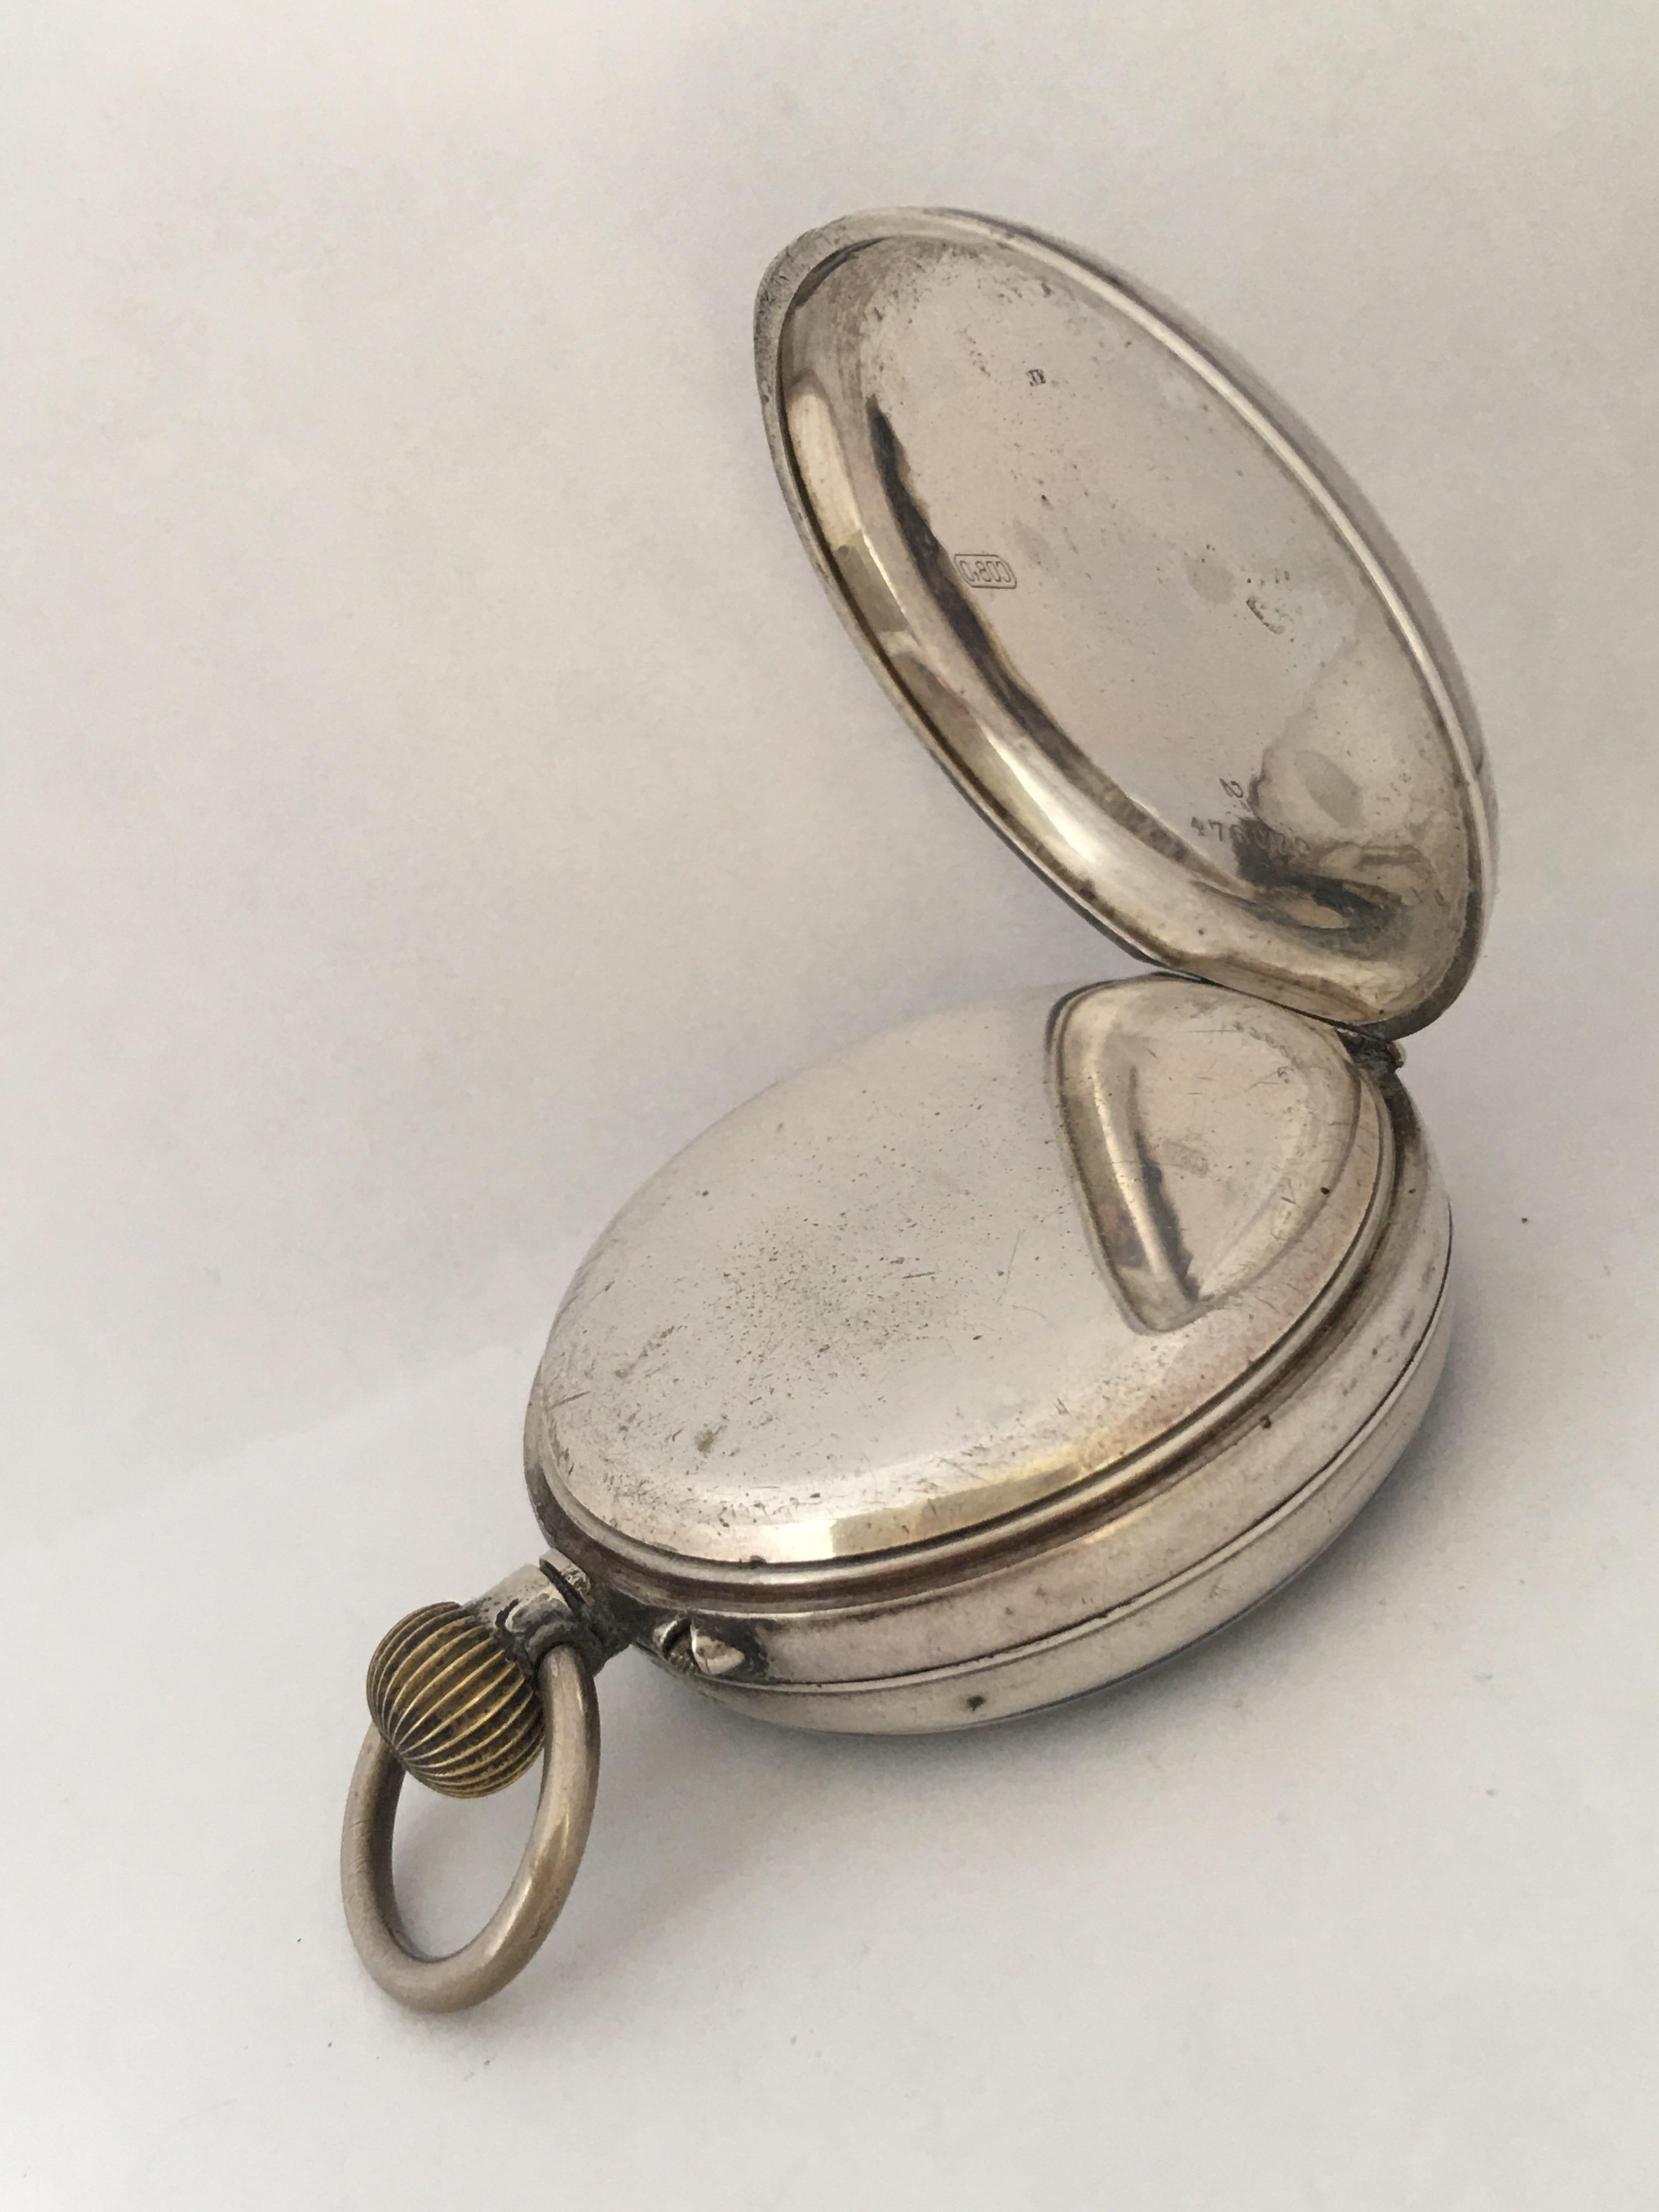 Antique Silver Hand-Winding Pocket Watch In Good Condition For Sale In Carlisle, GB